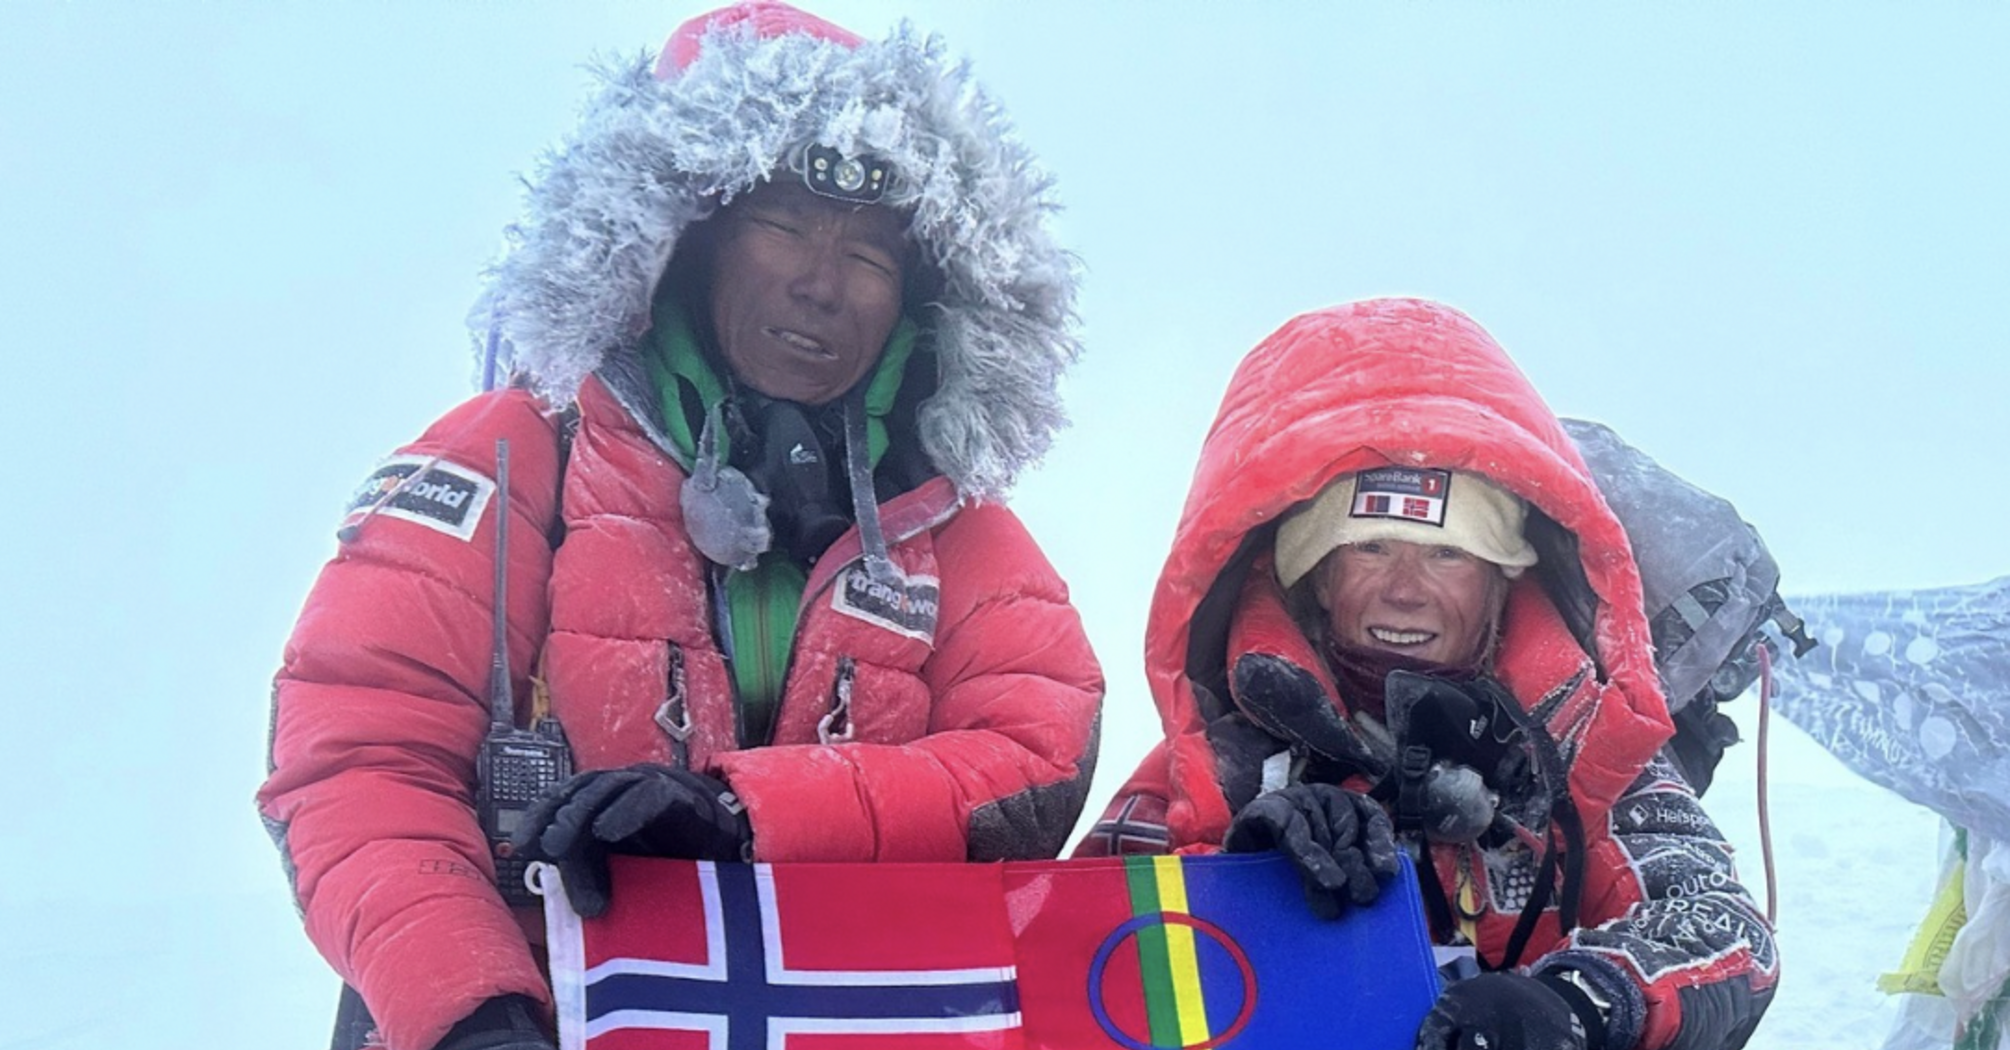 Norwegian climber and her guide set a record by conquering the world's highest peaks in 92 days